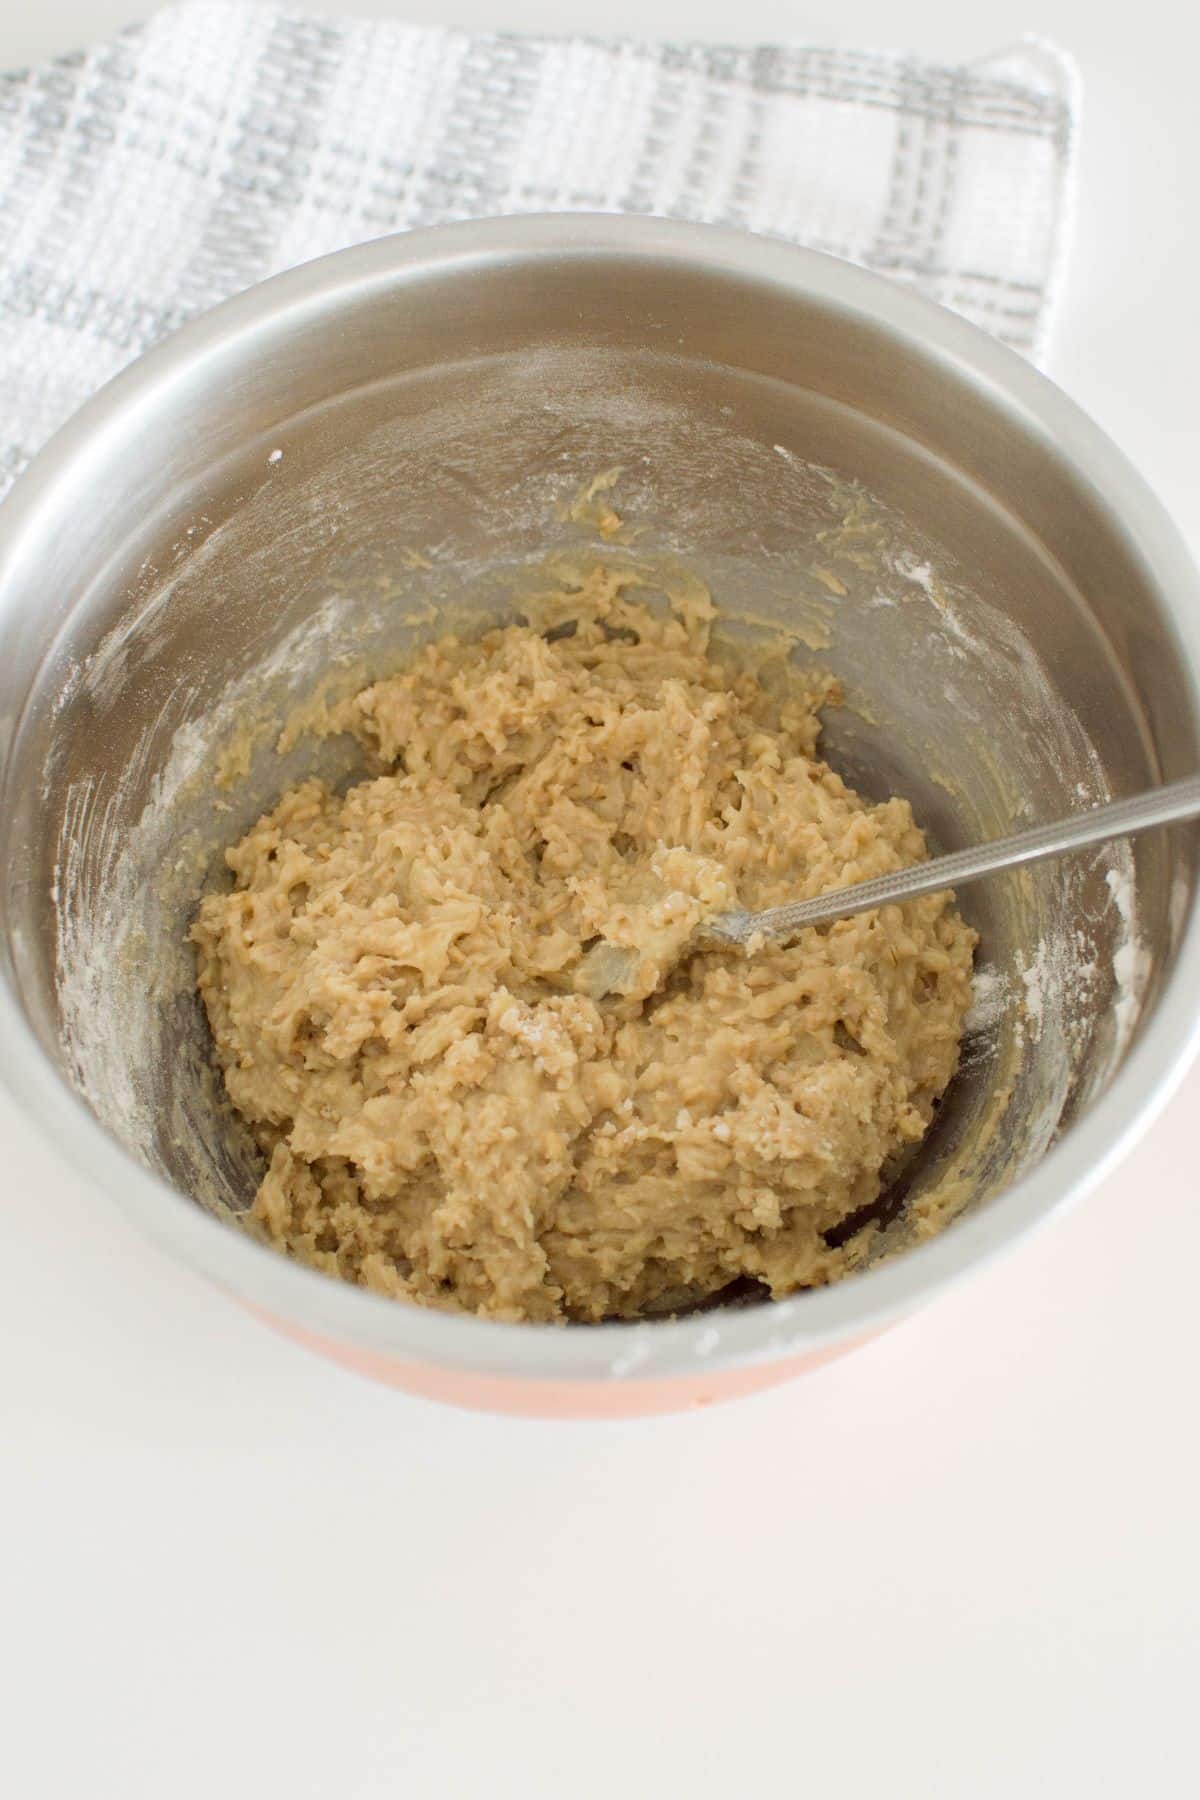 Wet and dry ingredients are combined together in a mixing bowl.